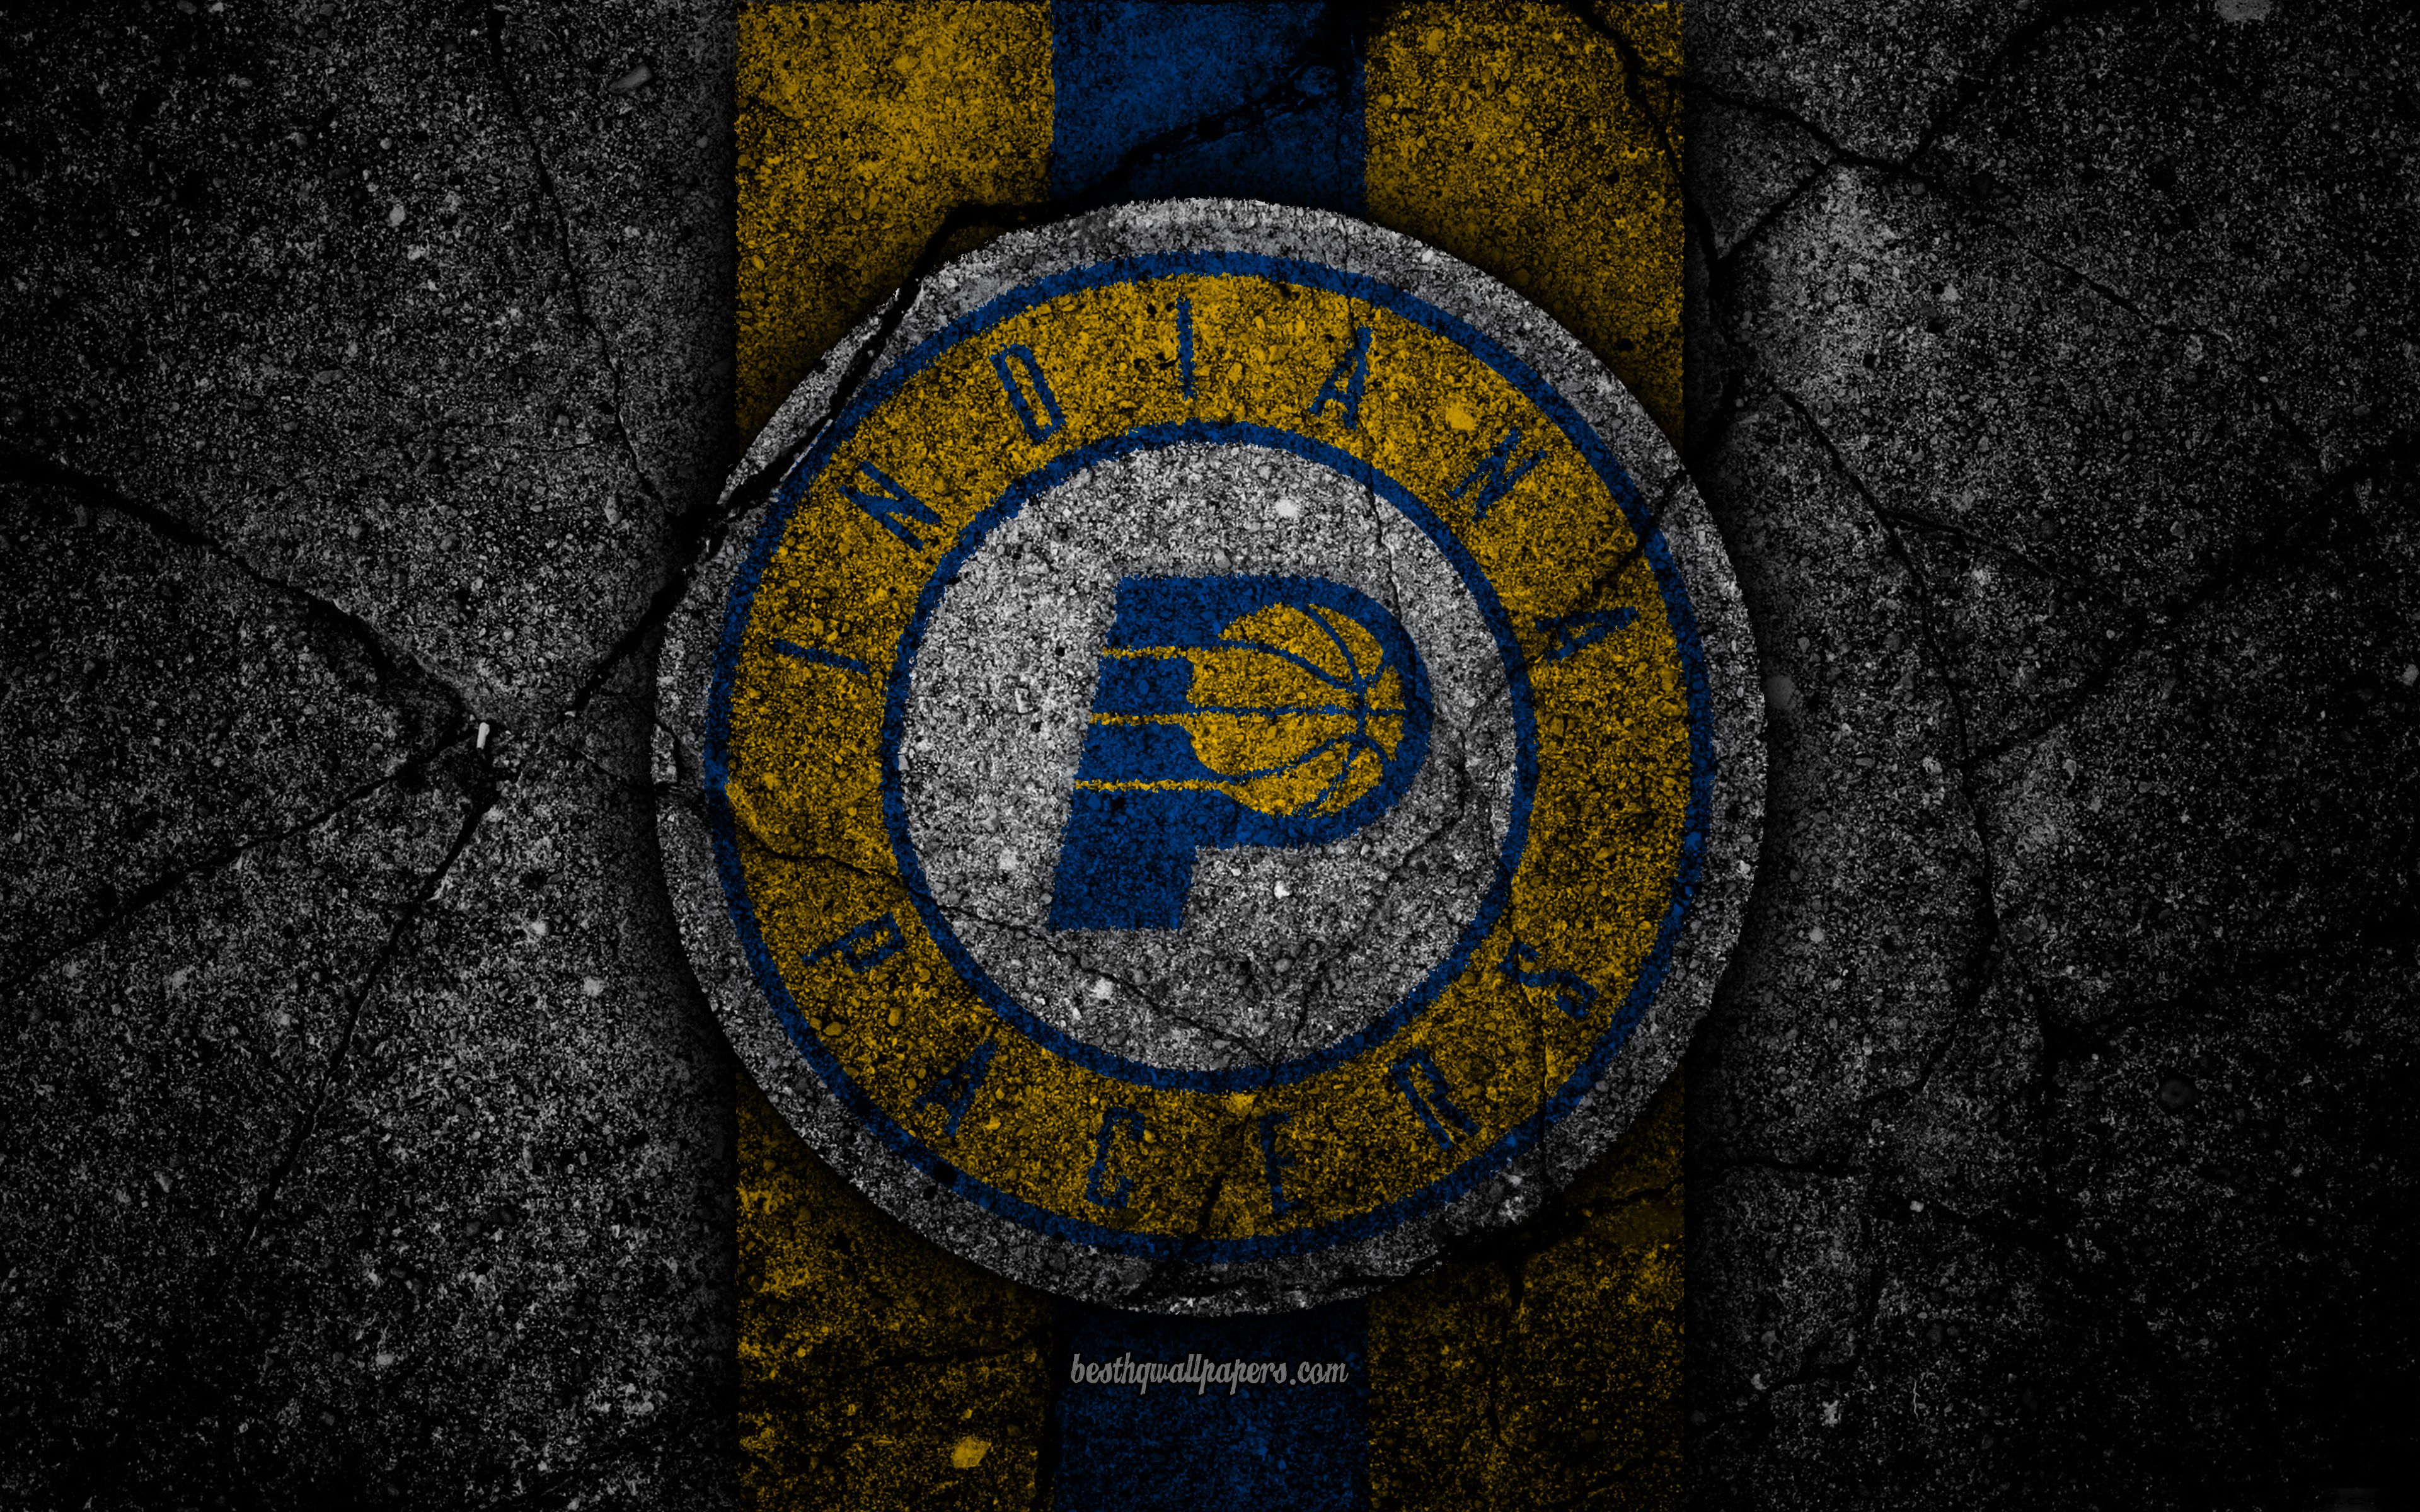 Indiana Pacers Logo Wallpapers - Wallpaper Cave